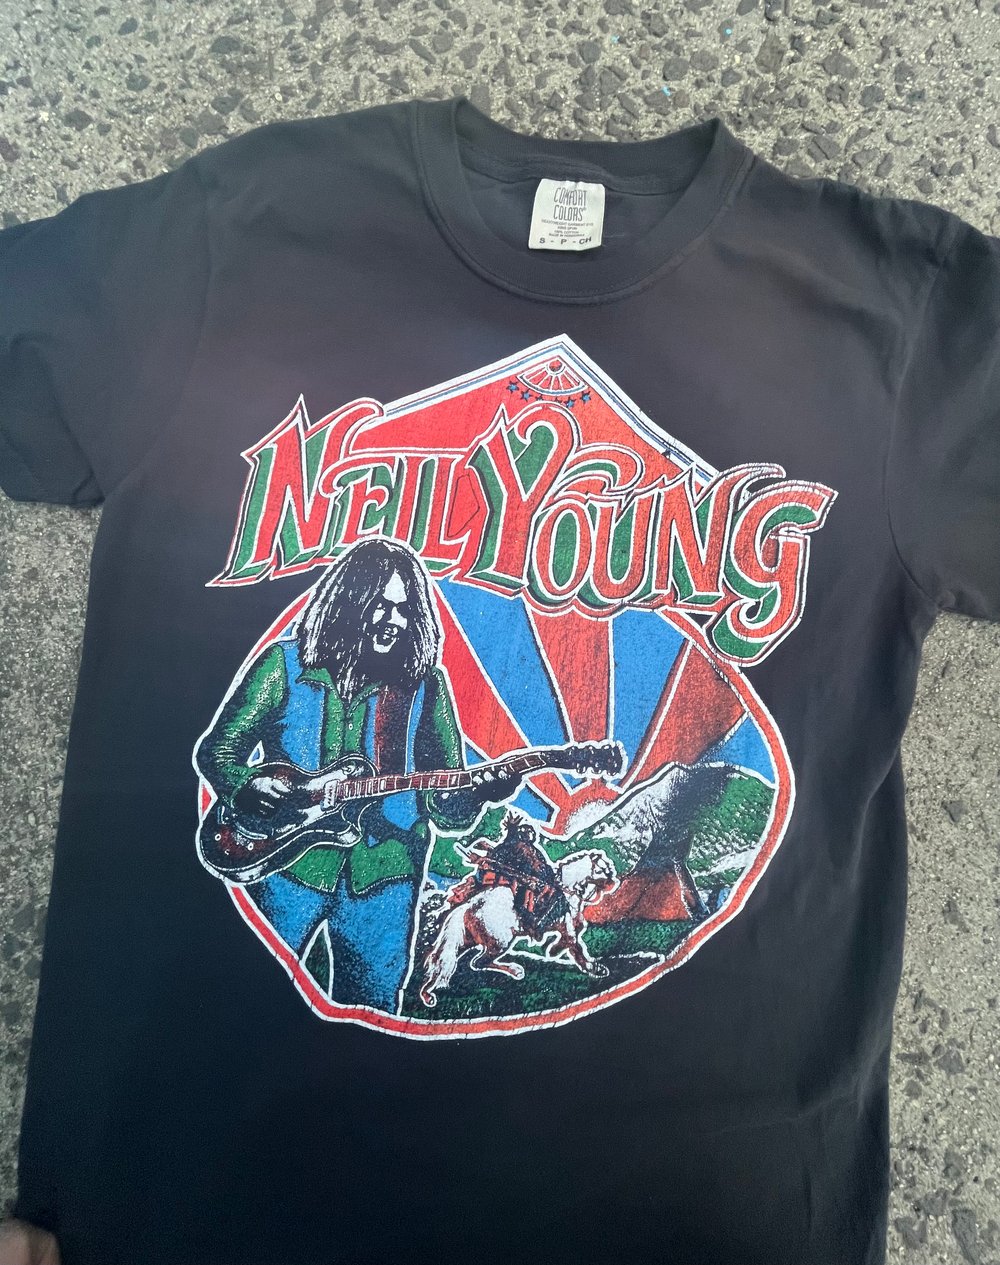 NEIL YOUNG 'Parking Lot' Tee